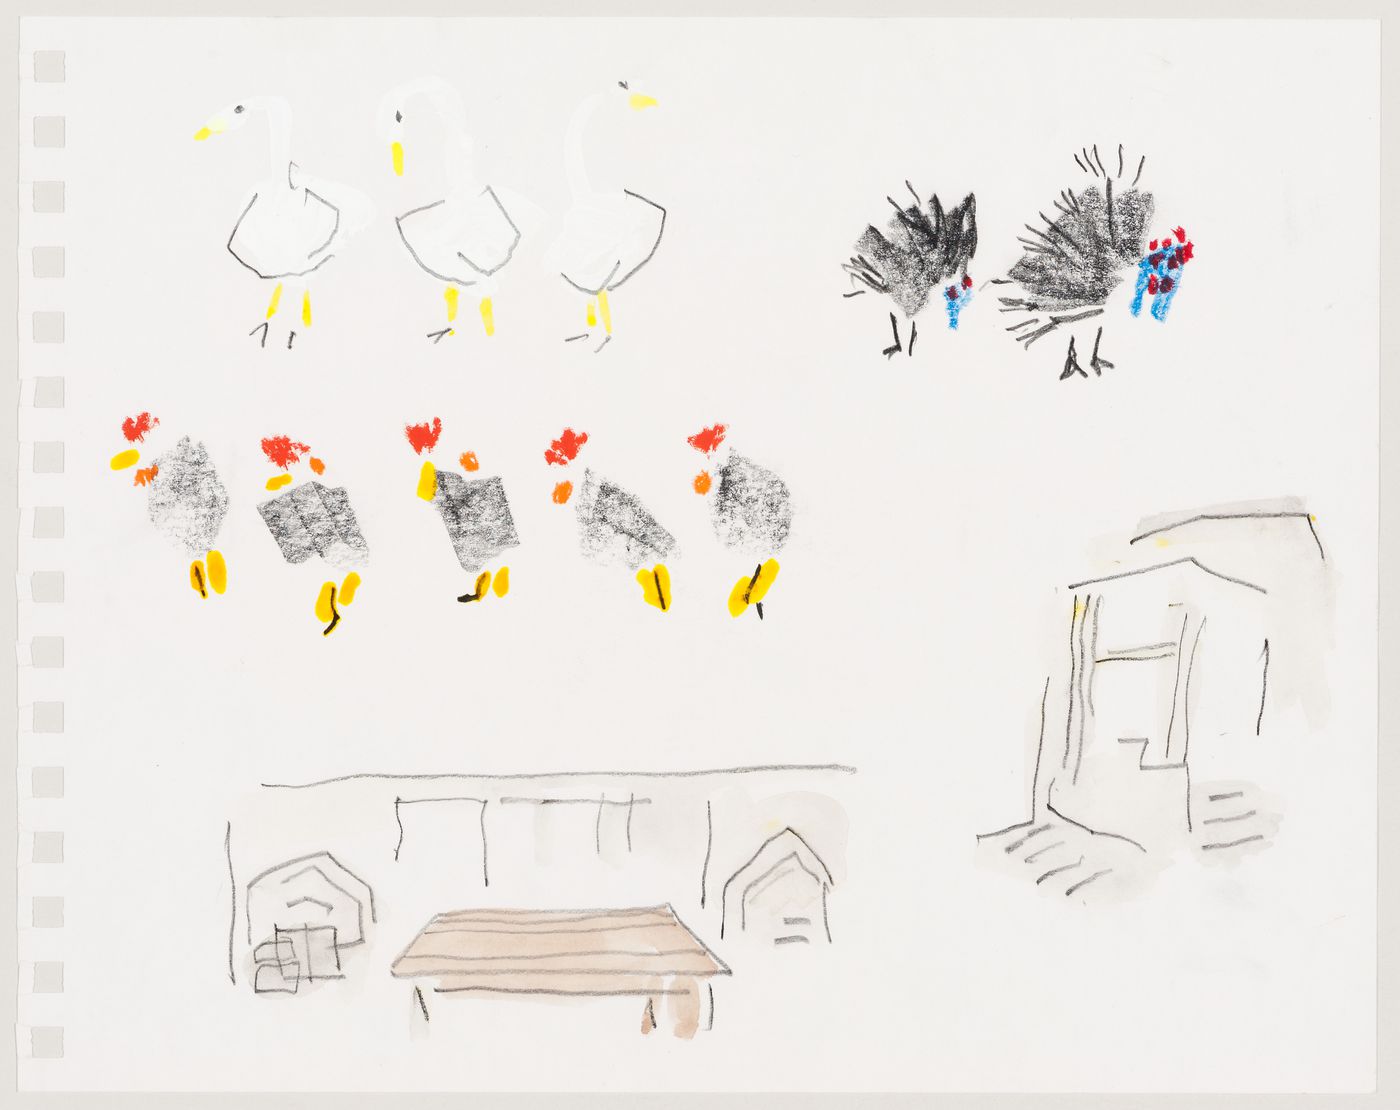 Sketches of geese, turkeys, chickens and two structures